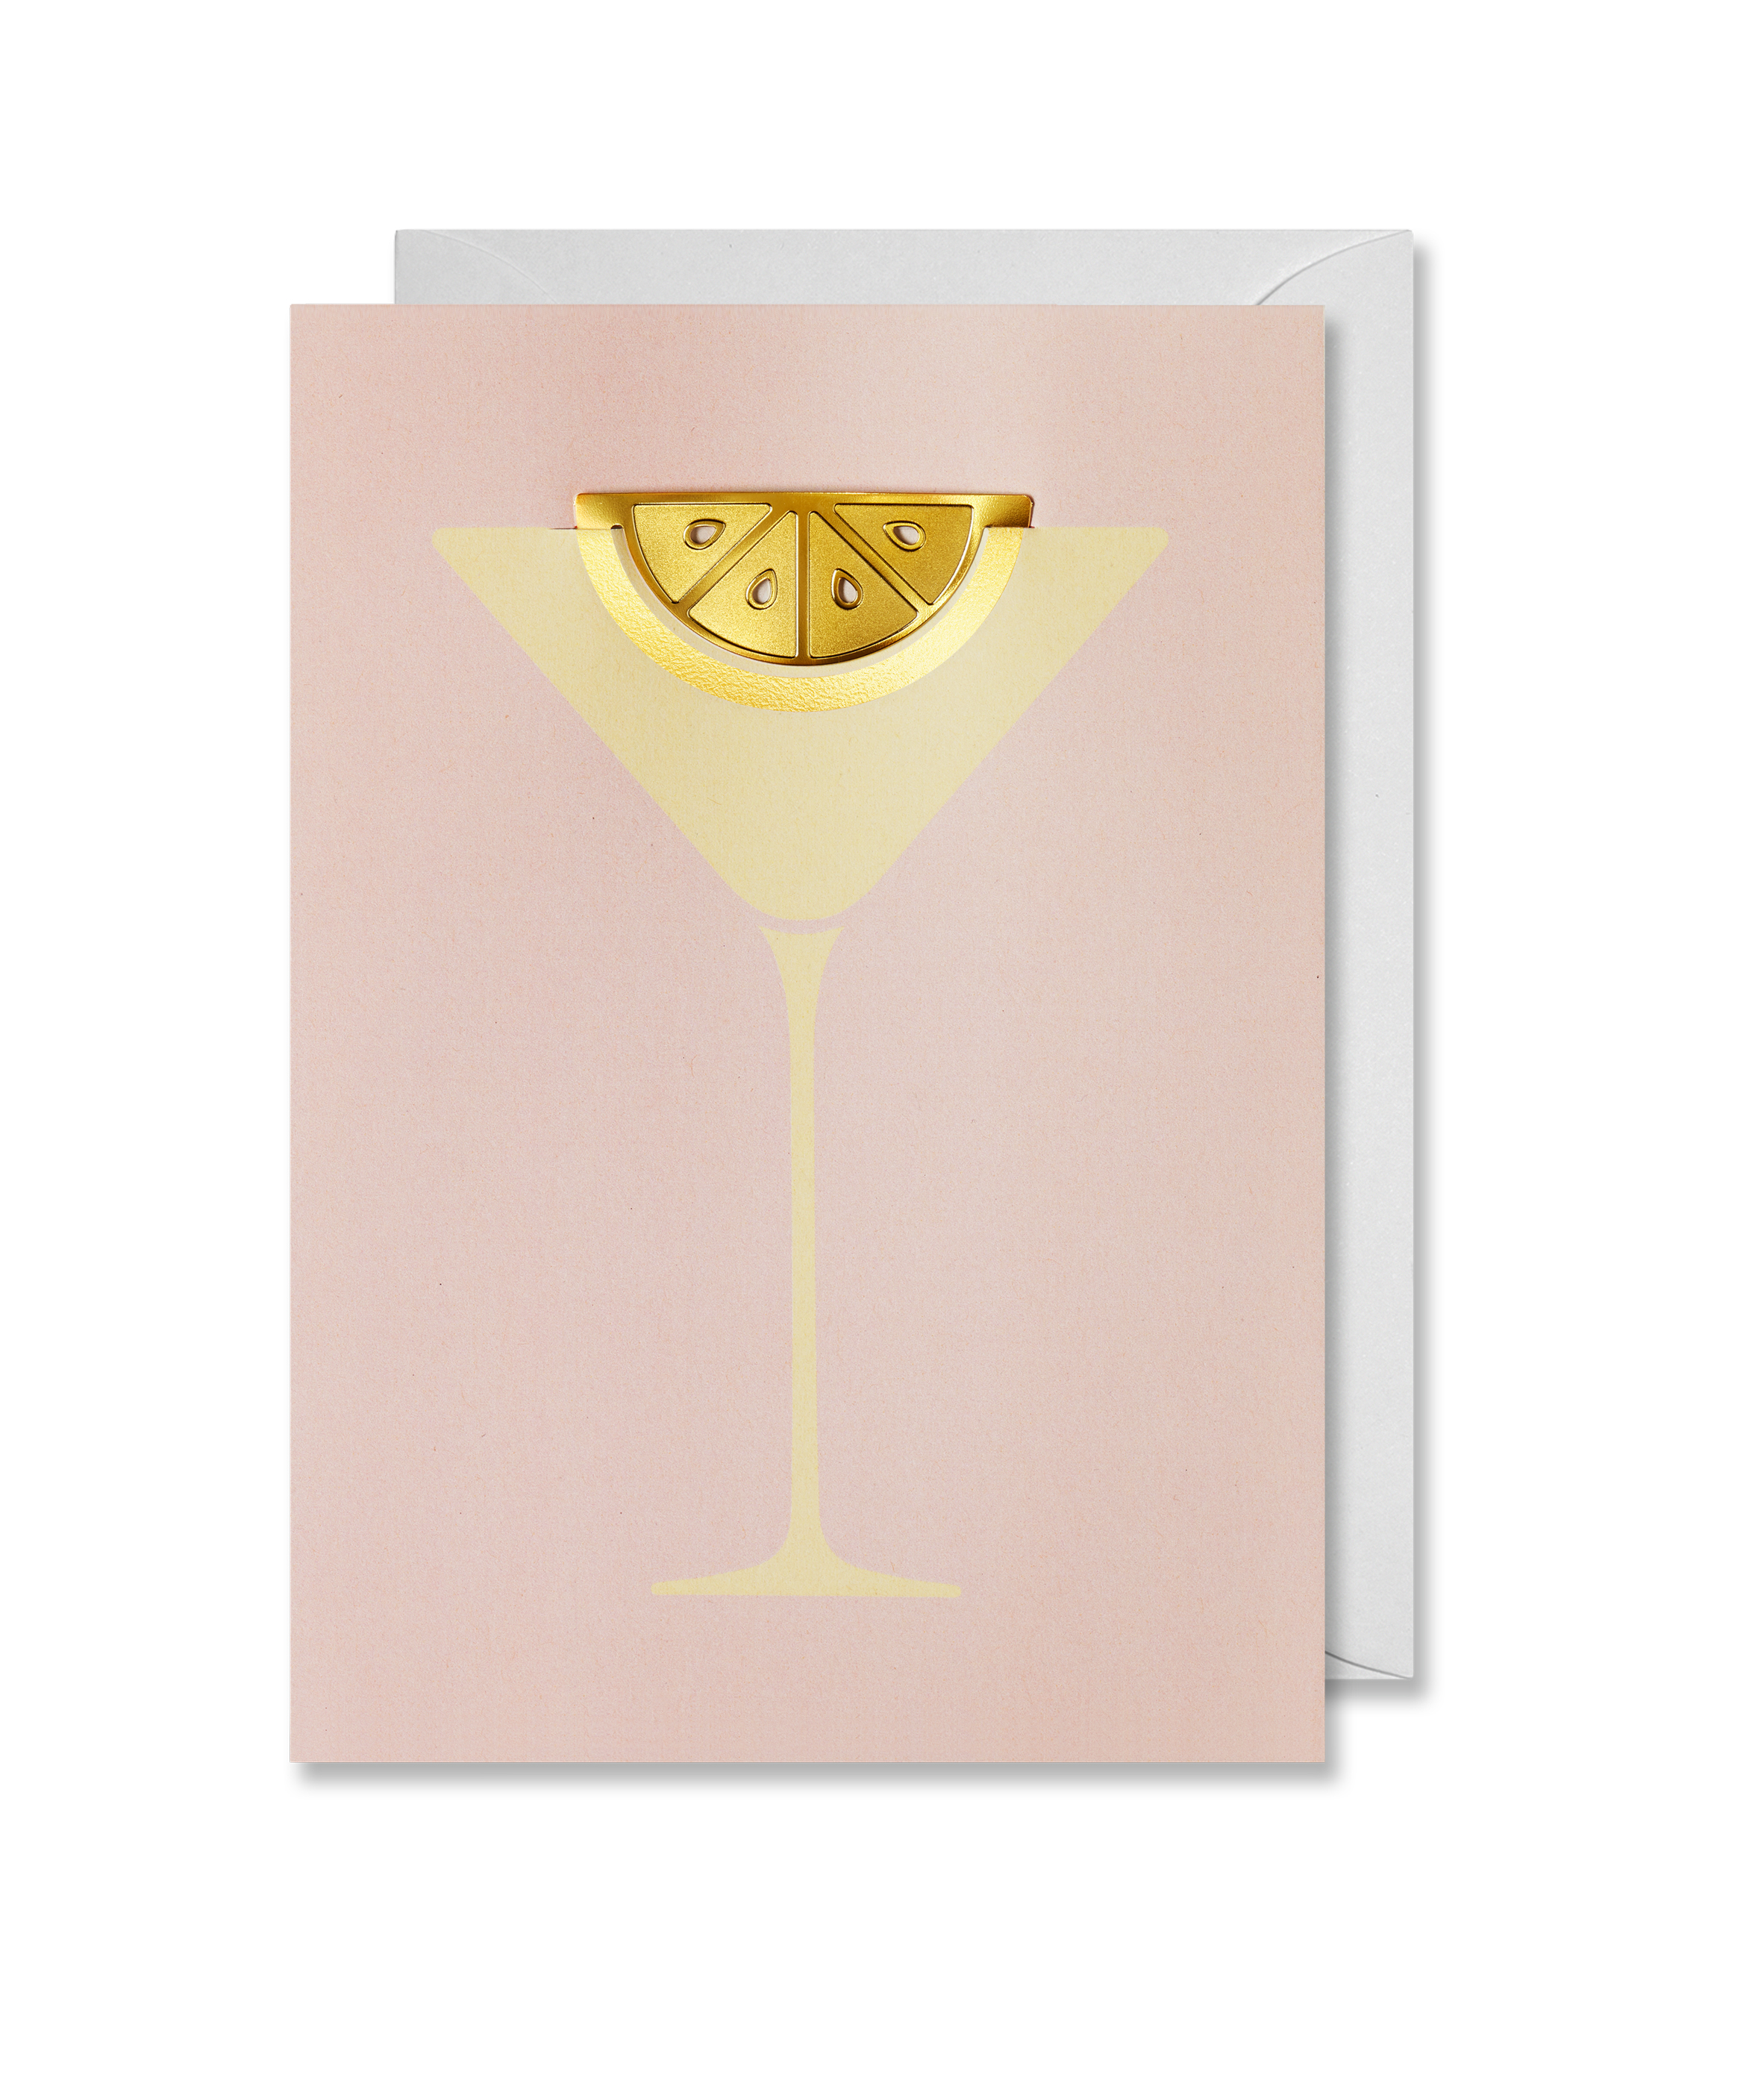 Greeting Card Cocktail